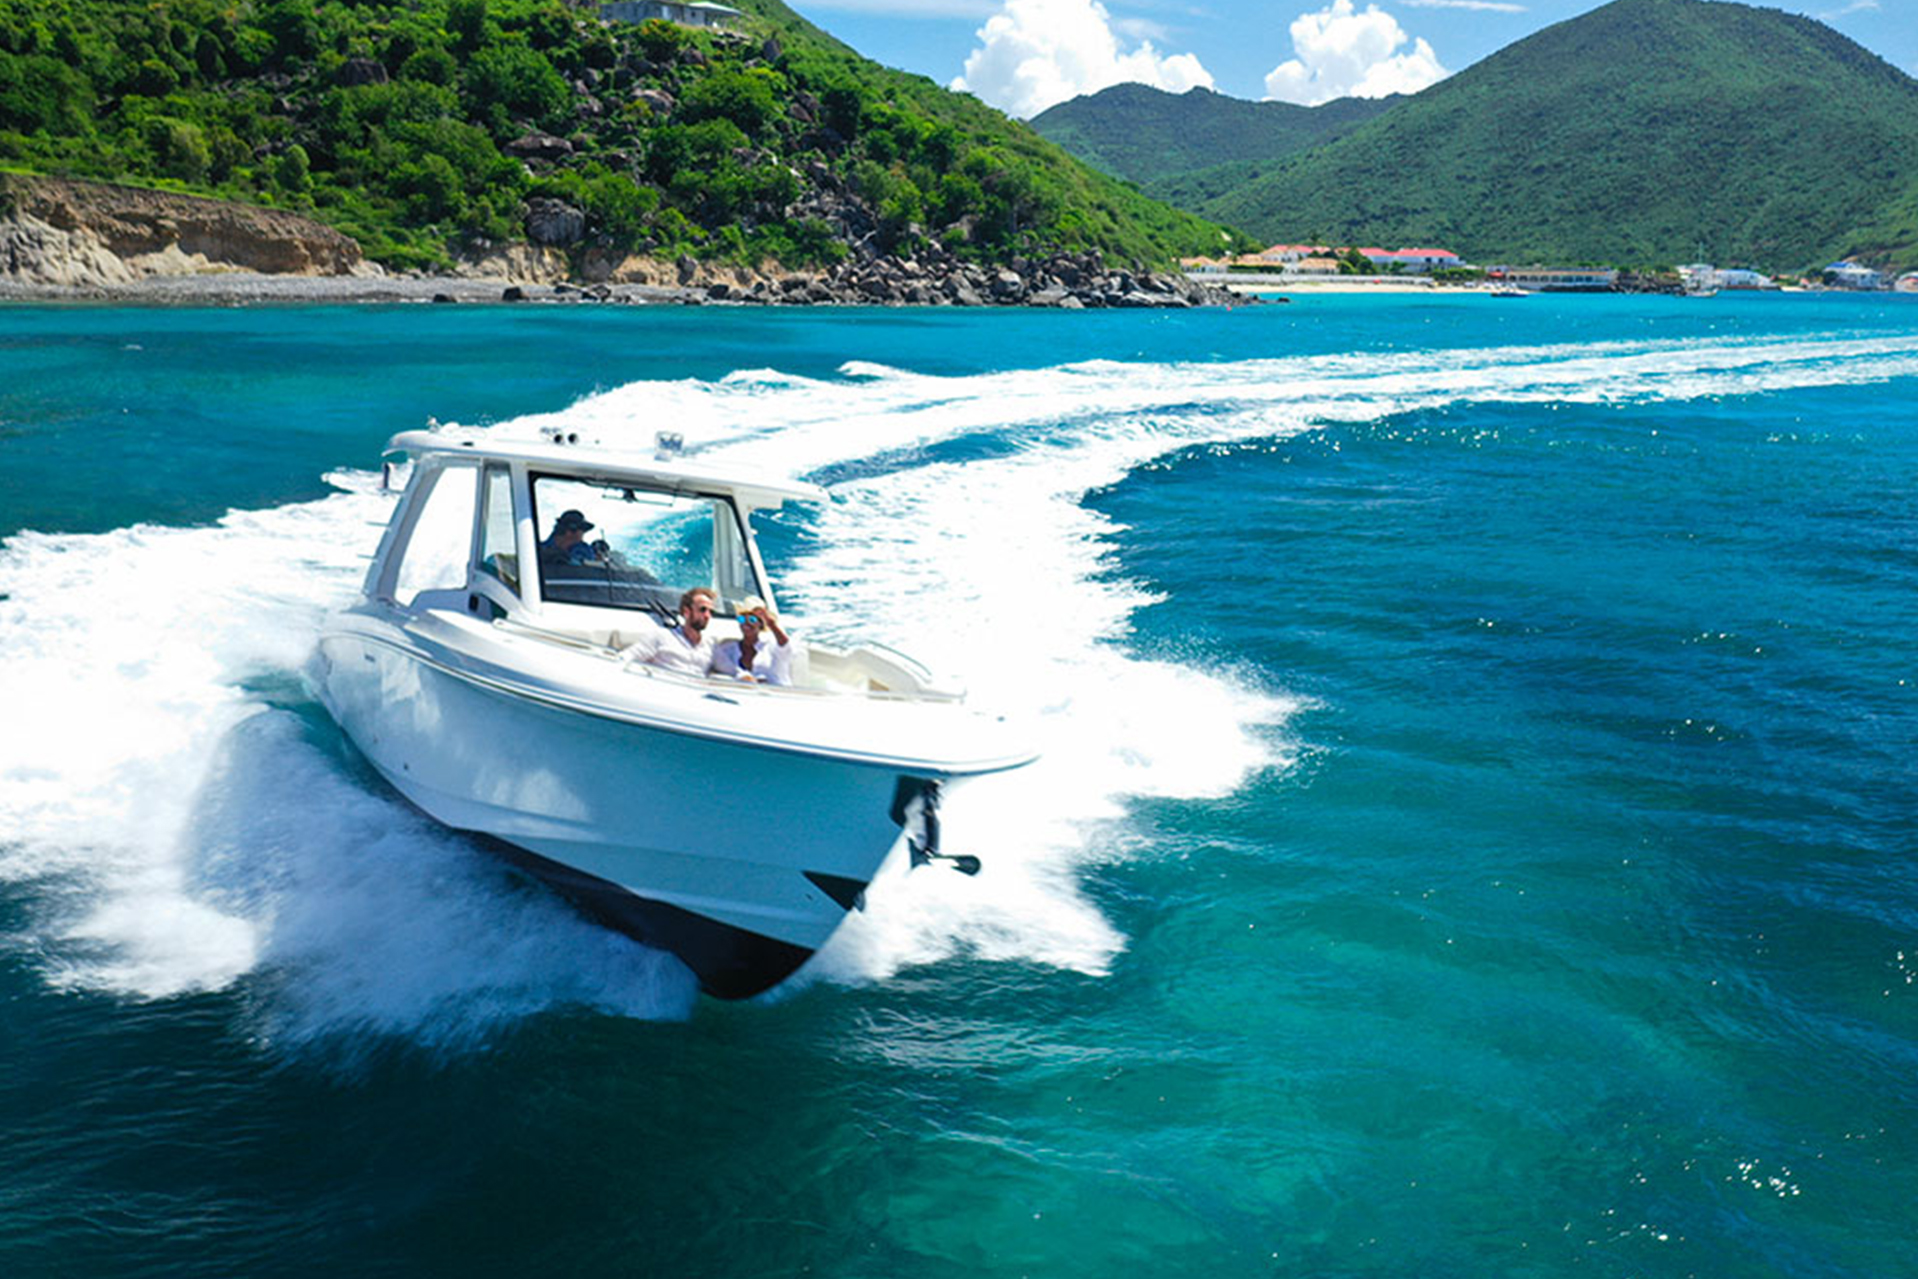 The Boston 35 is an elegantly designed yacht, with clean lines.